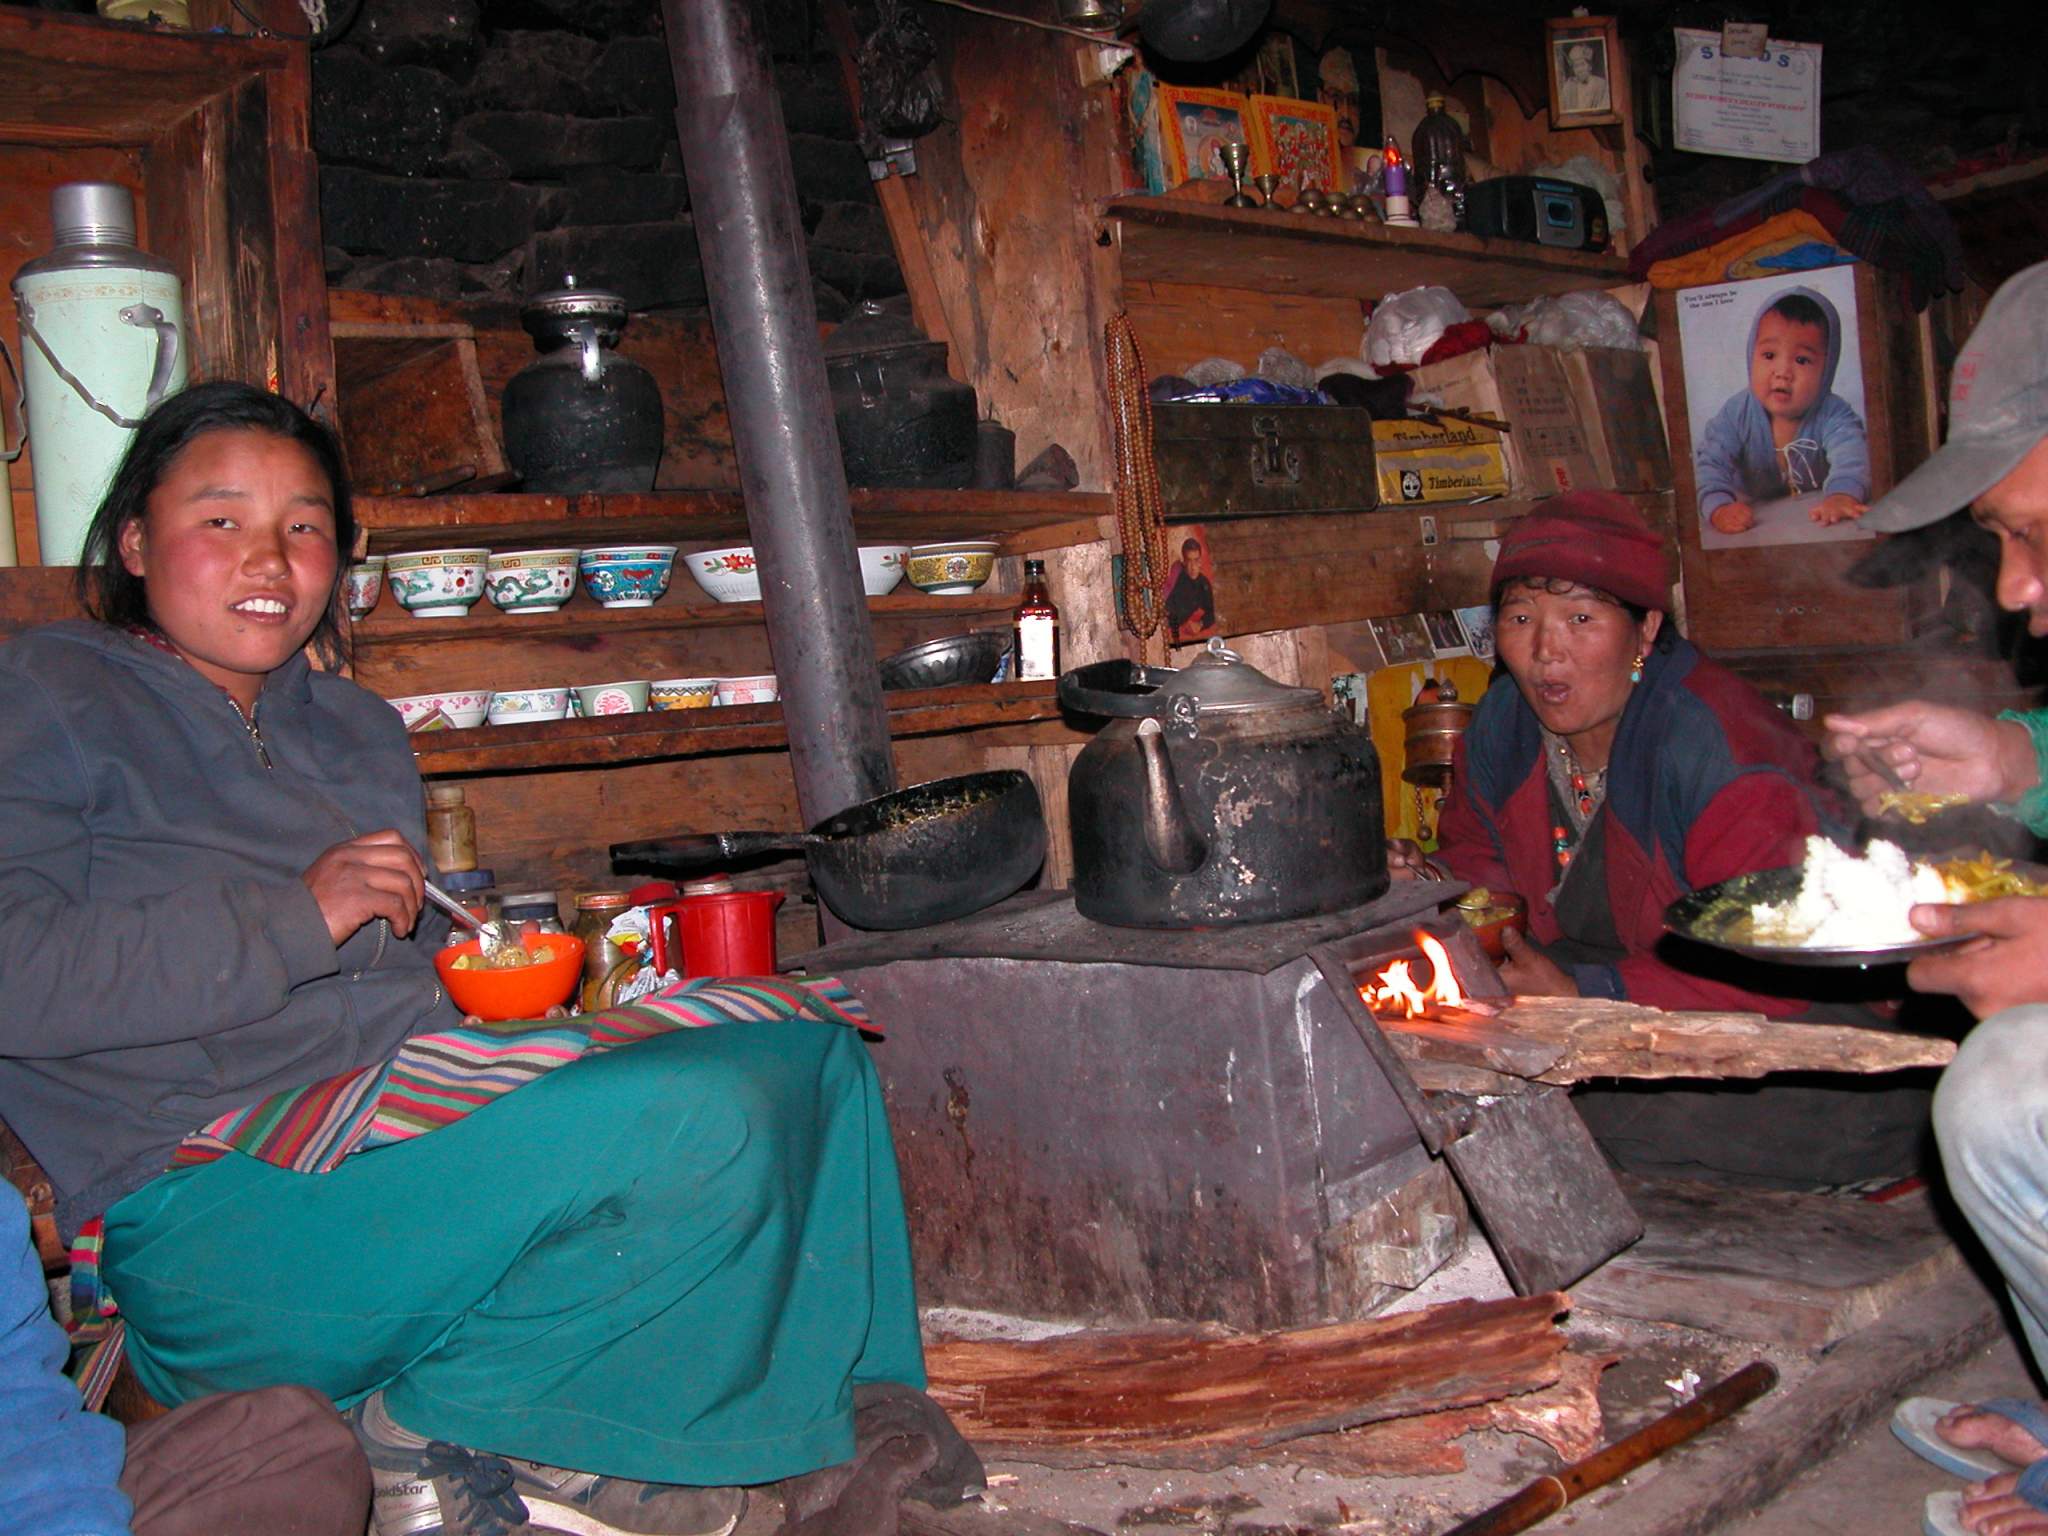 Manaslu 06 10 Syala Mother and Daughter In Lodge The campsite was already occupied by a Spanish group, so we stayed at the Maili Manaslu Hotel, Shyala, Gorkha. The lodge is being run by a mother and her daughter. The girl laughs liberally while mom sits silent, but smiling. I ate my dinner of rice and vegetable curry (hey, this isn't daal baht, is it), I watched as the girl cut mini-potatoes and fried them in a cast iron type pan on a small wood stove. I told her that potatoes were my favourite. She offered me a bowl, which I gratefully accepted. They were fantastic, though a bit spicy.